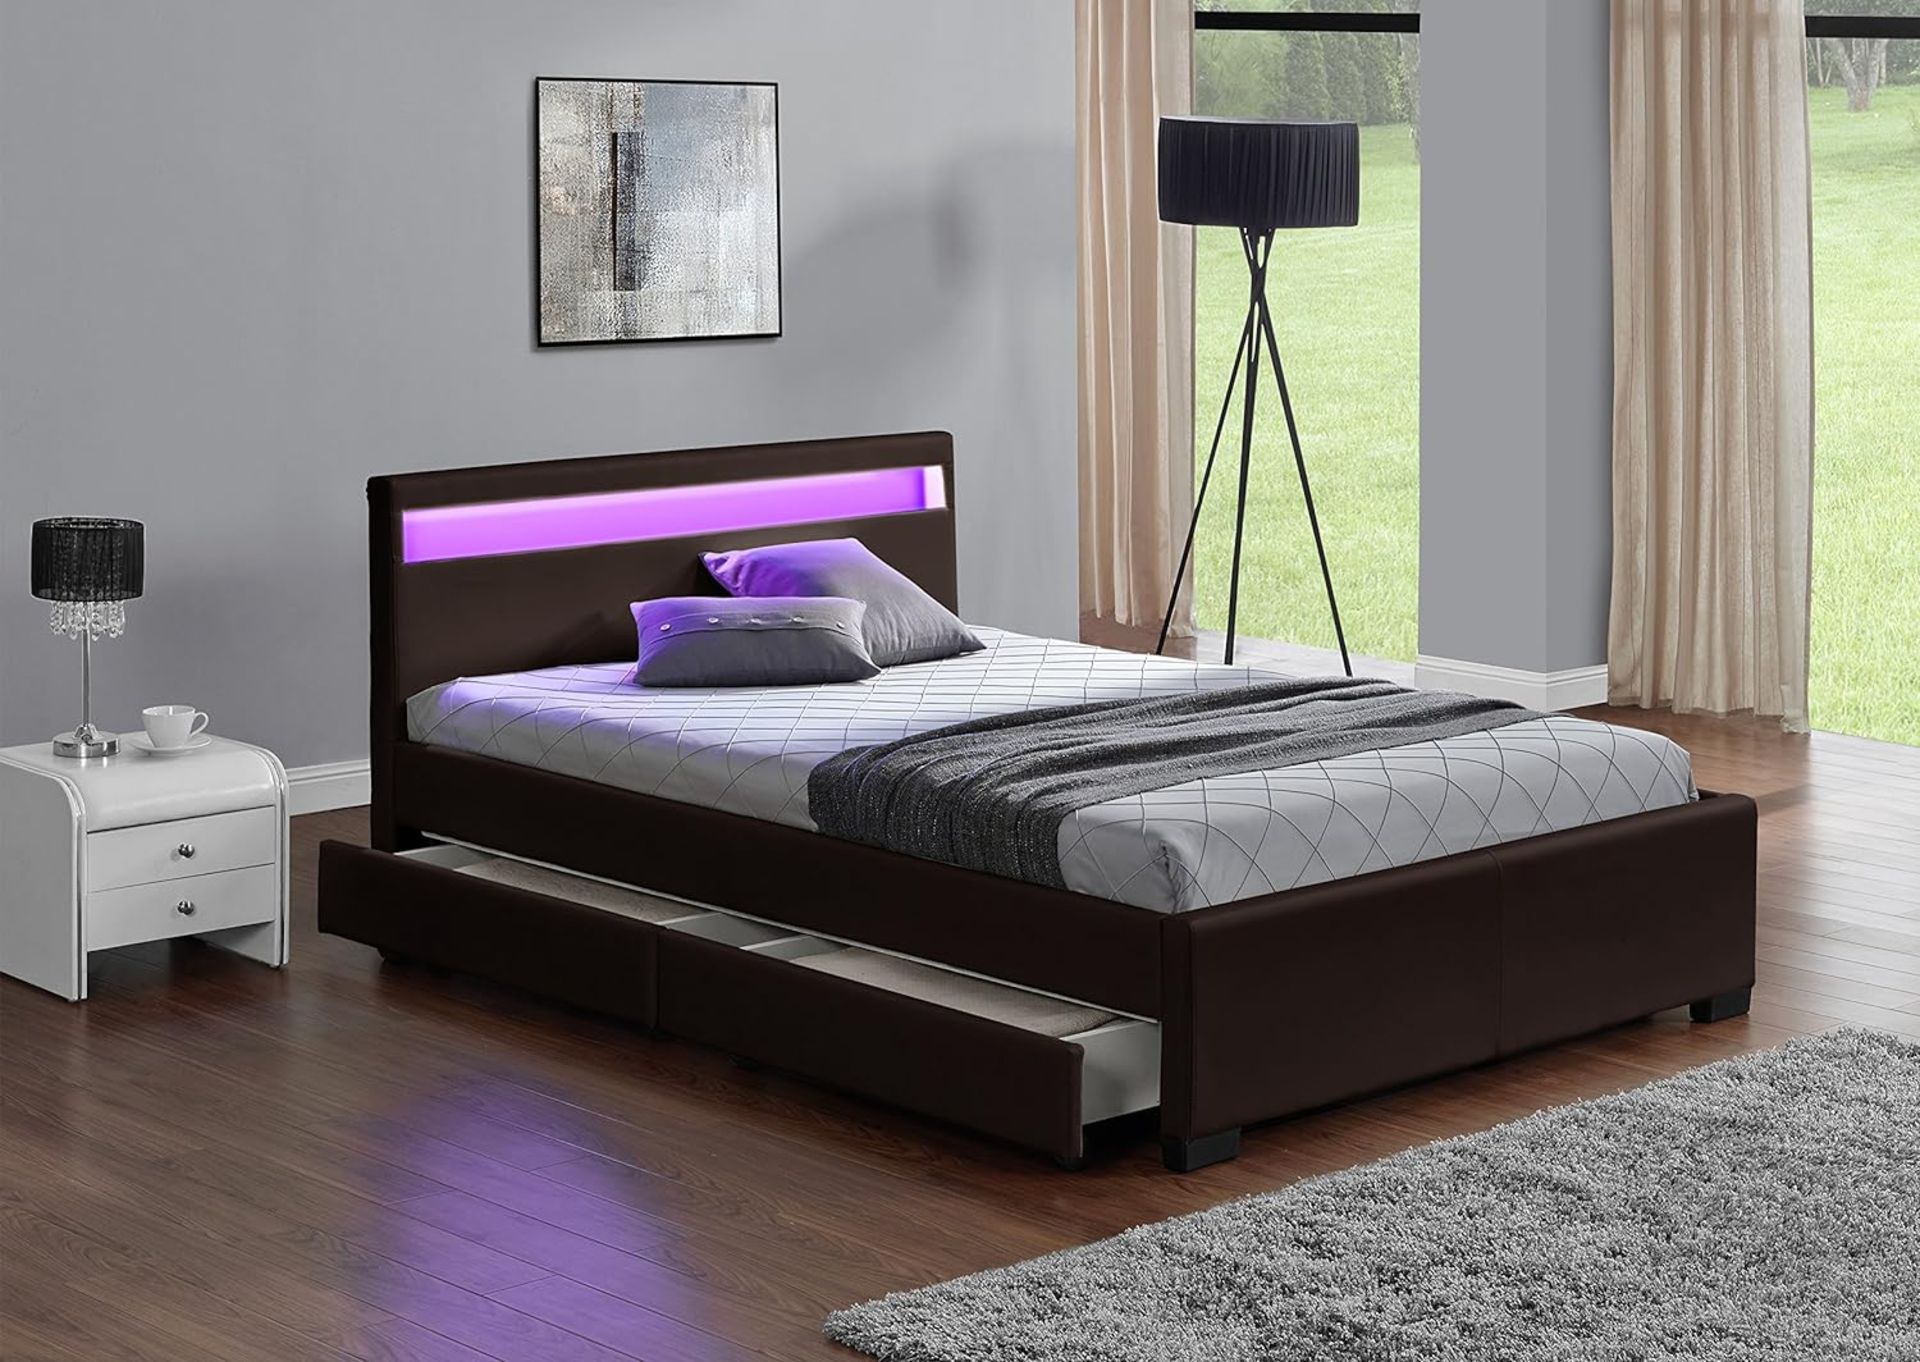 DESIGNER MUSIC BED, BLUETOOTH, SPEAKERS, LED COLOUR CHANGING FAUX LEATHER BED - Image 4 of 6